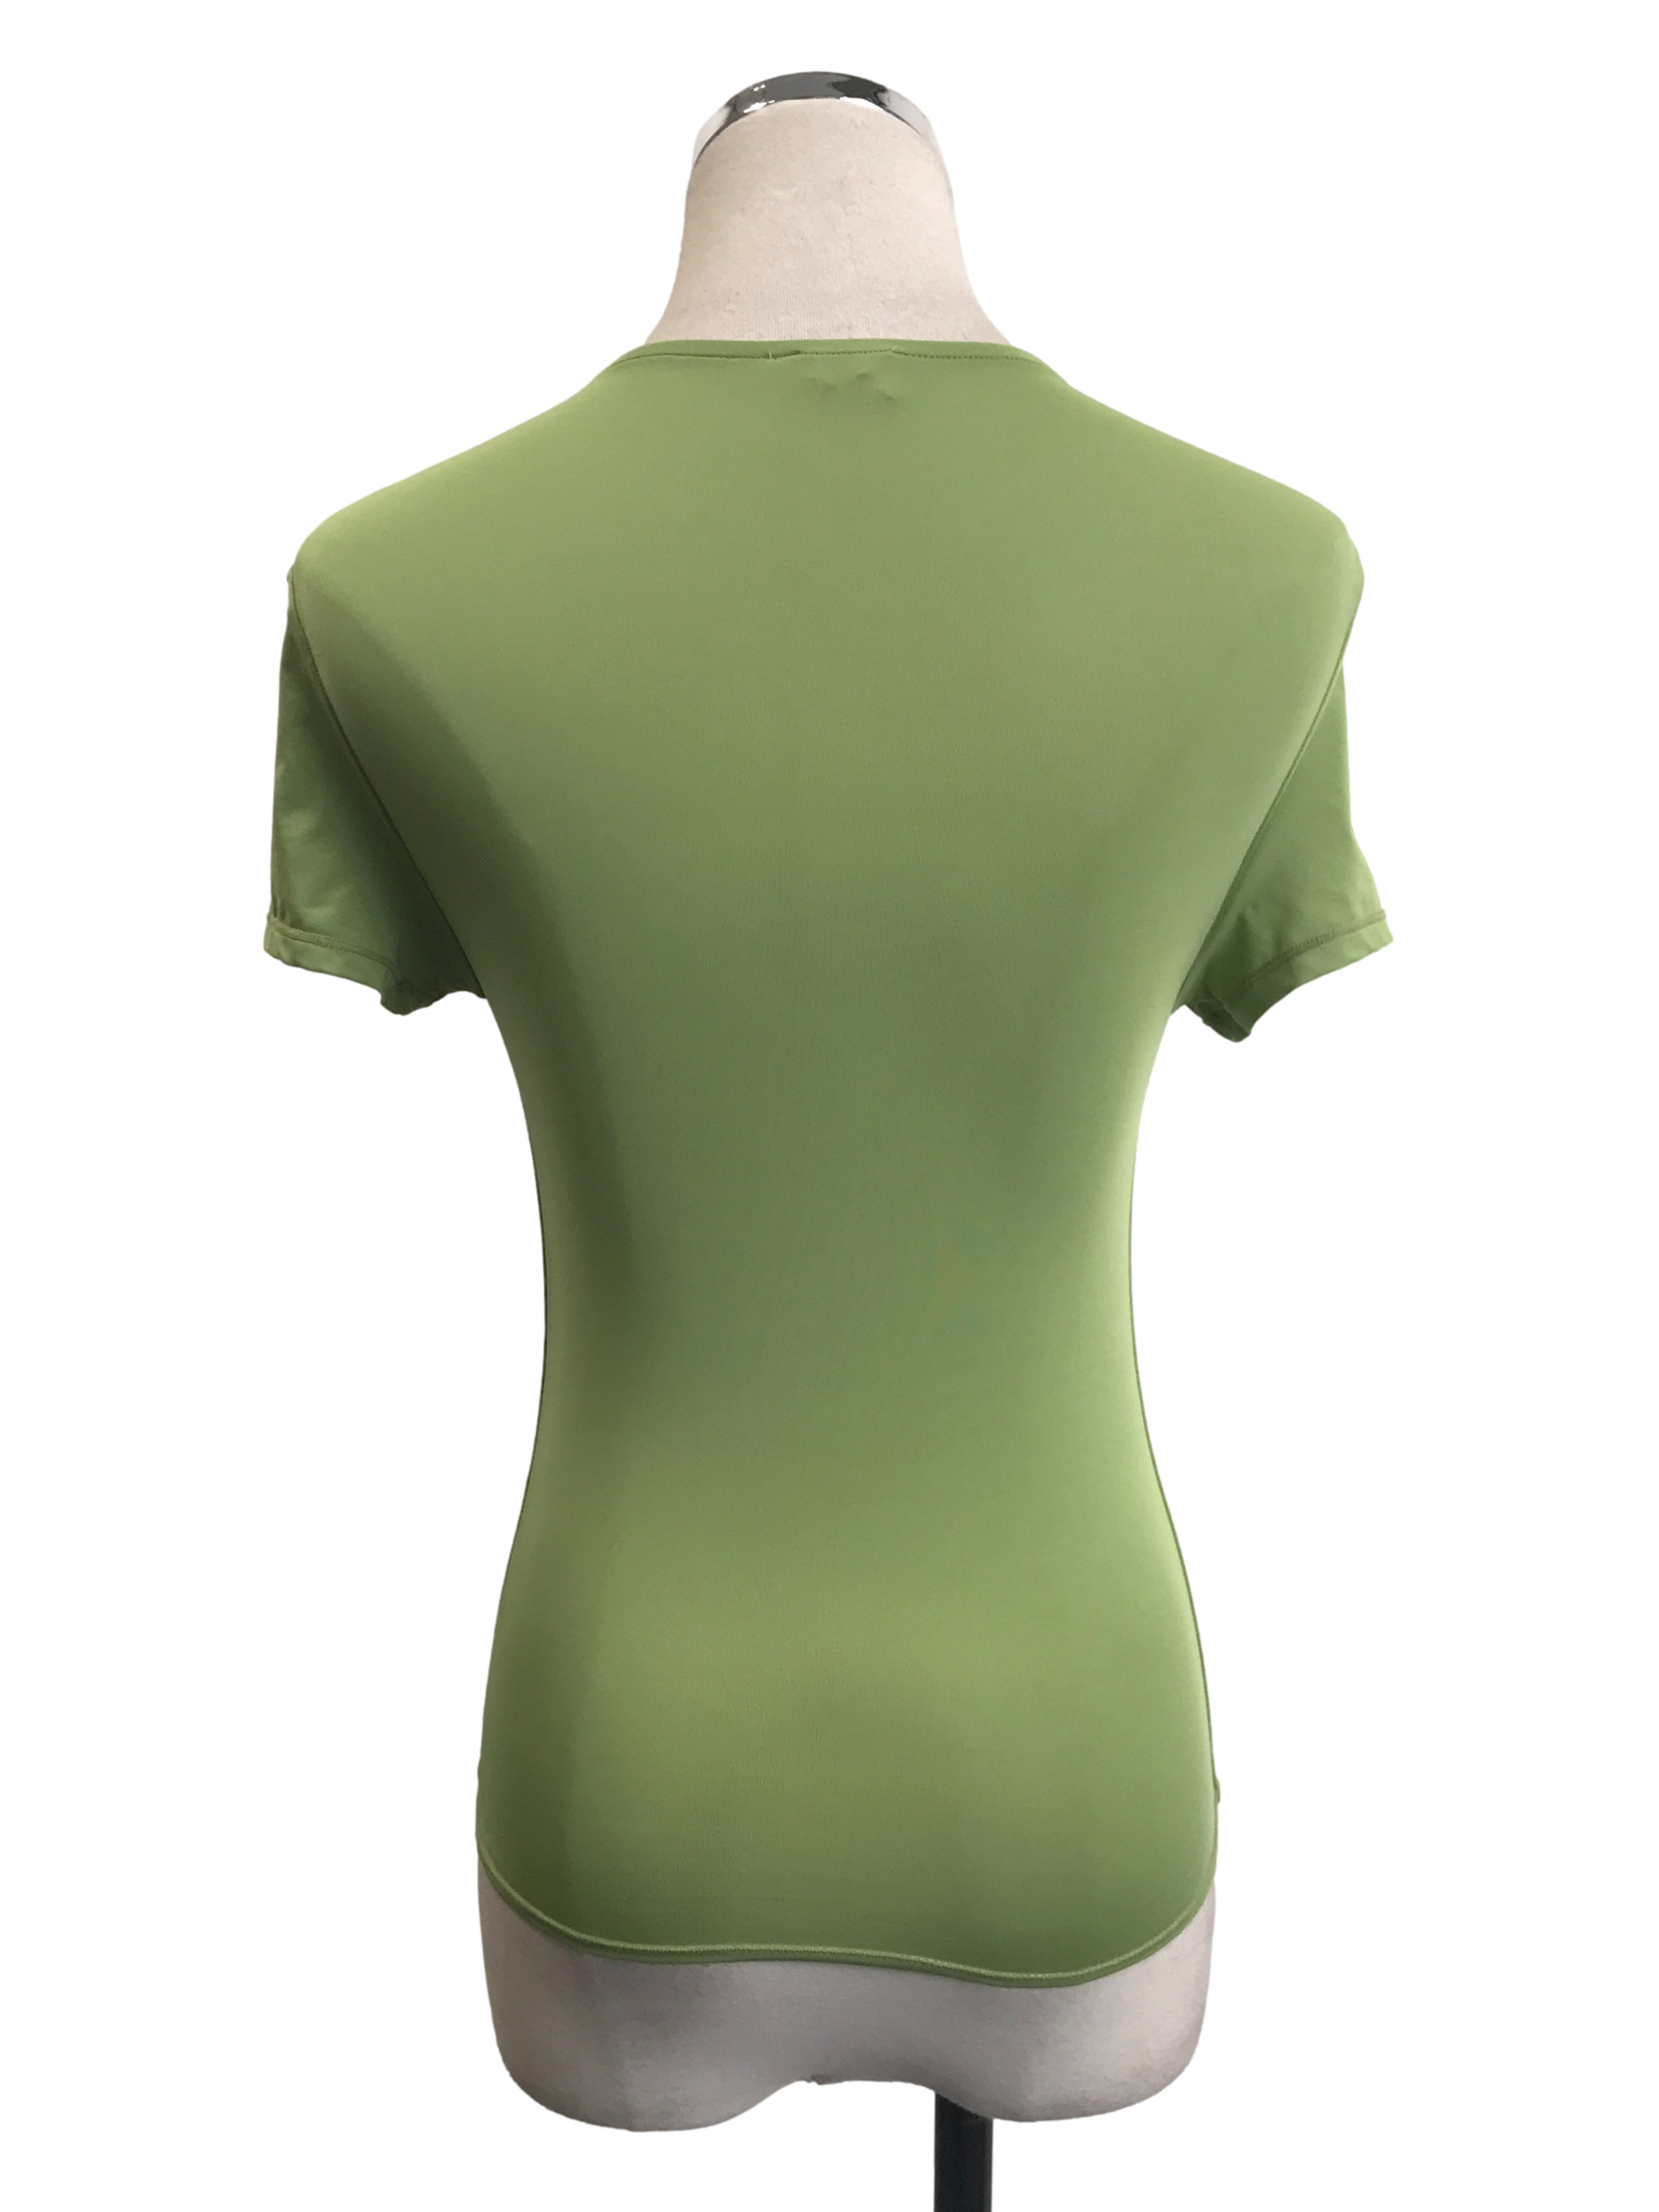 Kelly Green Recycled Plastic Short Sleeve Top